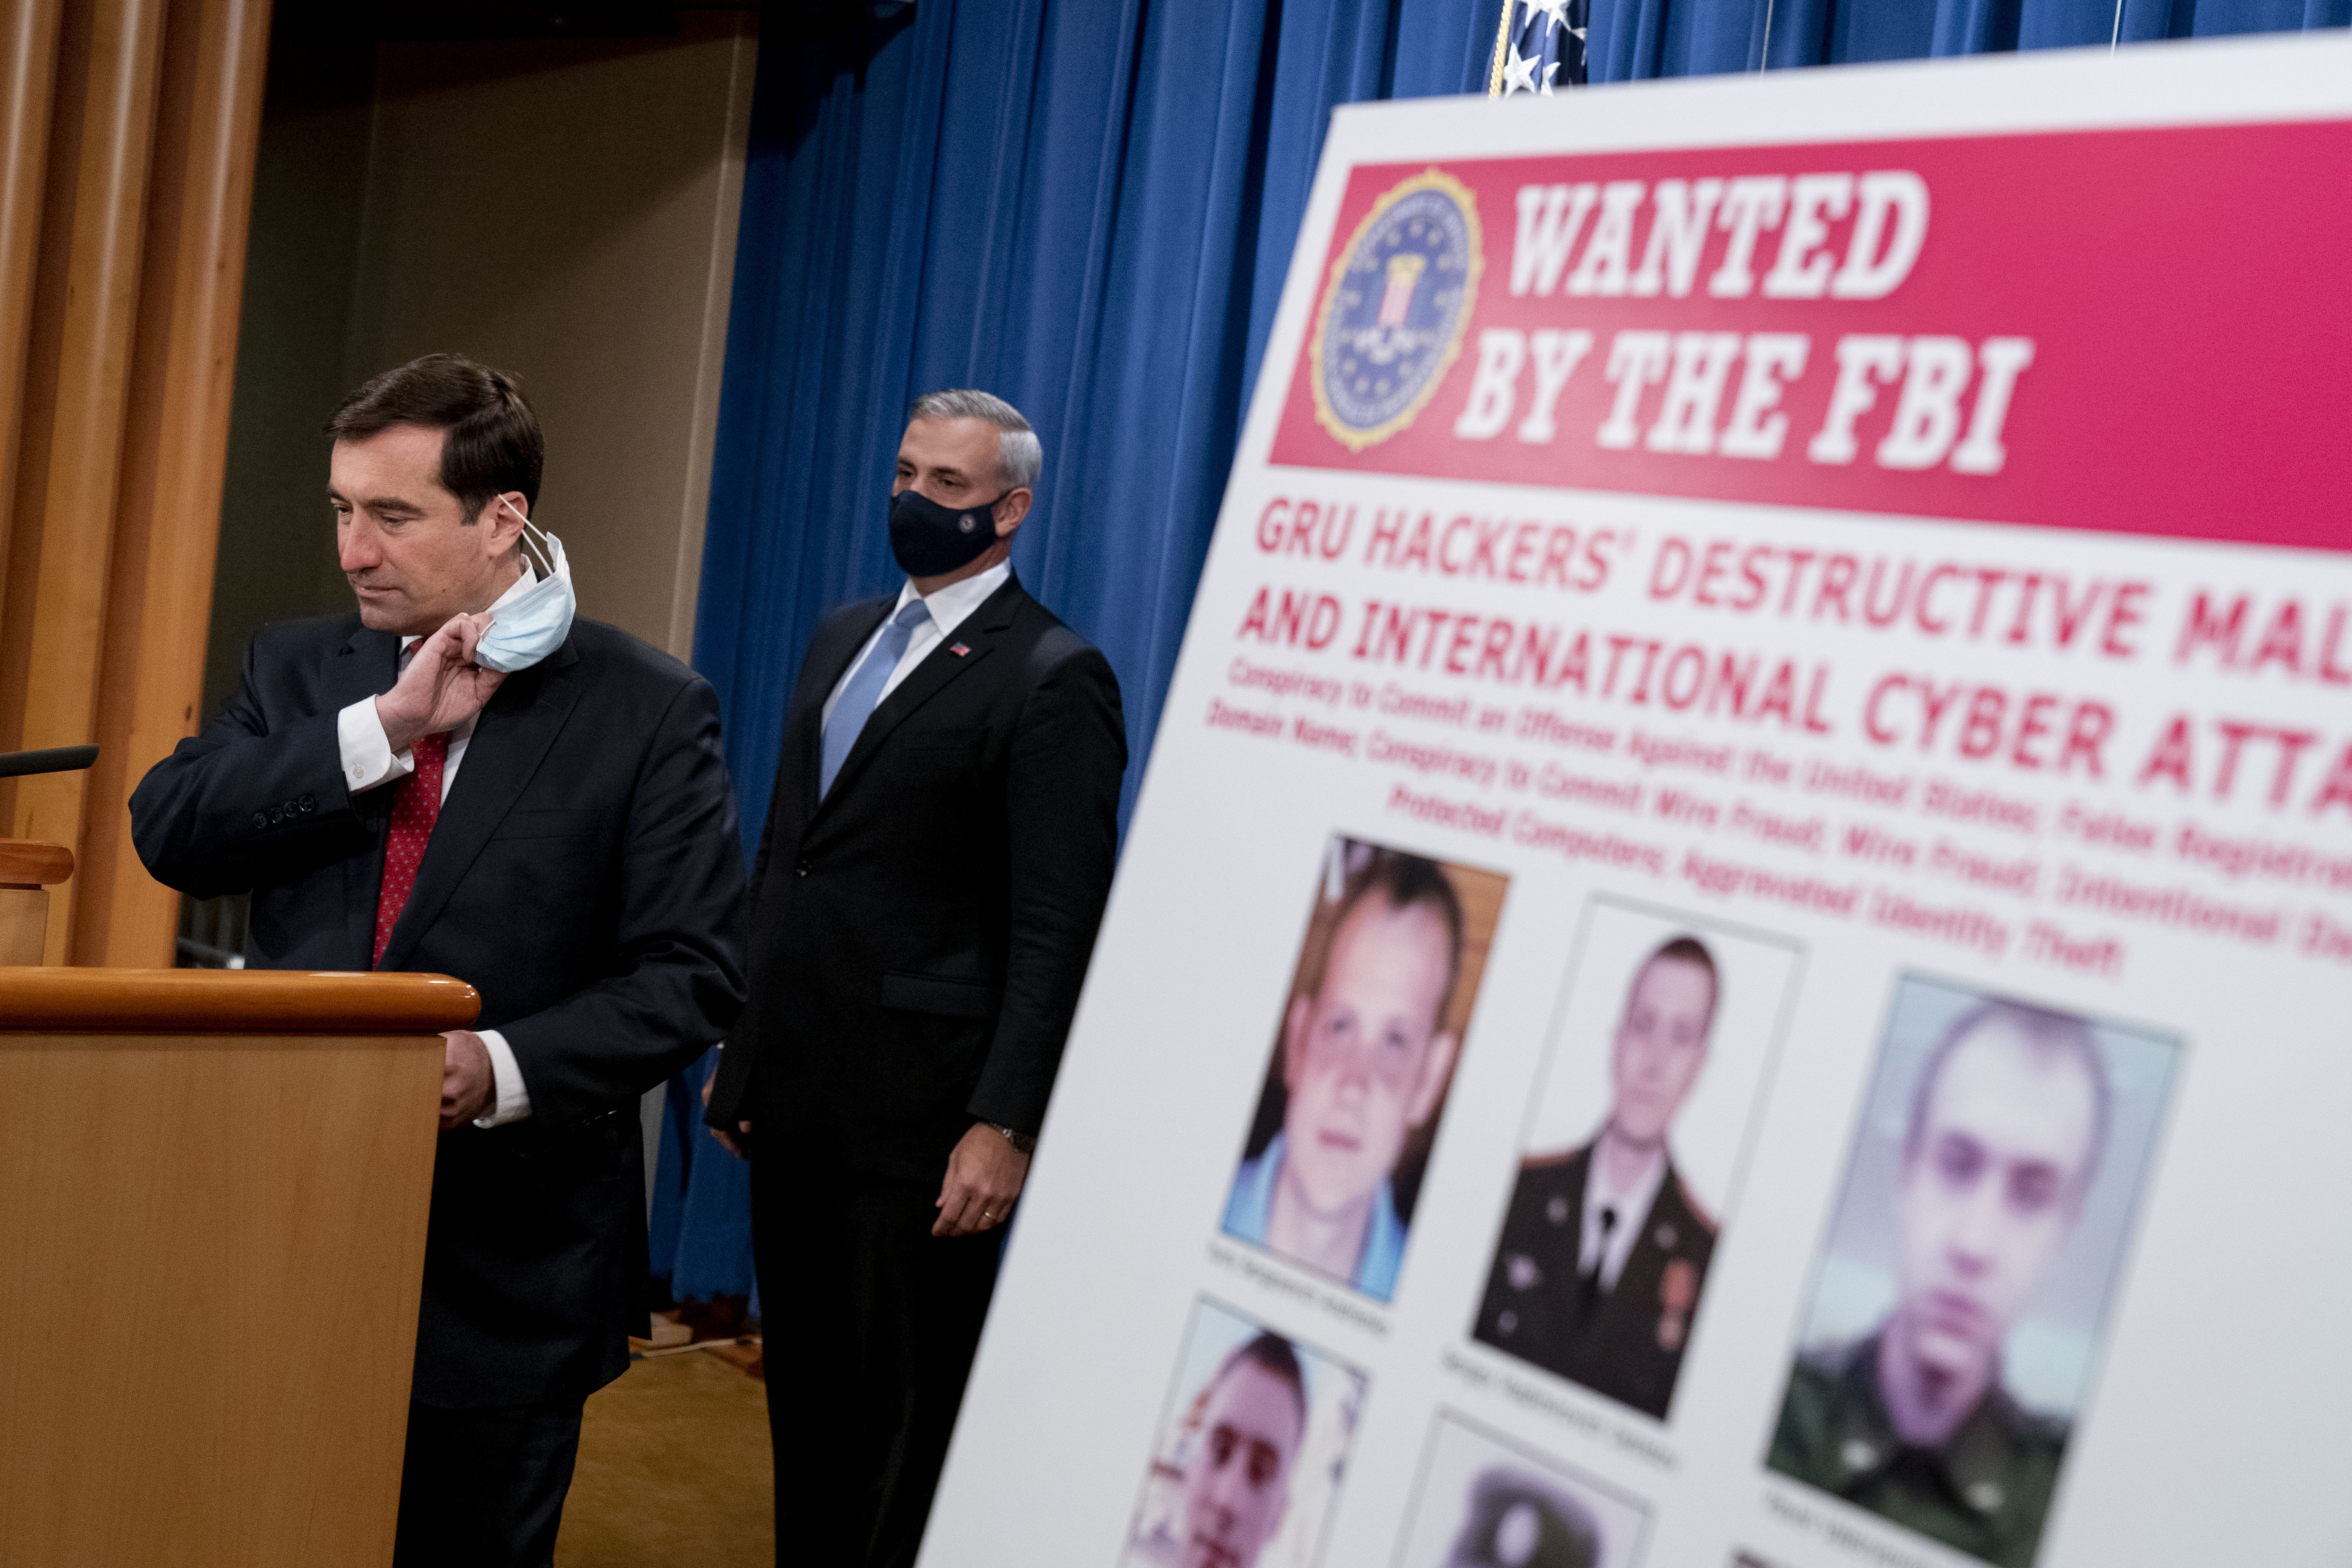 A poster showing six wanted Russian military intelligence officers is displayed as Assistant Attorney General for the National Security Division John Demers, left, takes the podium to speak at a news conference at the Department of Justice, Monday, Oct. 19, 2020, in Washington. Also pictured is US Attorney for the Western District of Pennsylvania Scott Brady, center. (AP Photo/Andrew Harnik, pool)